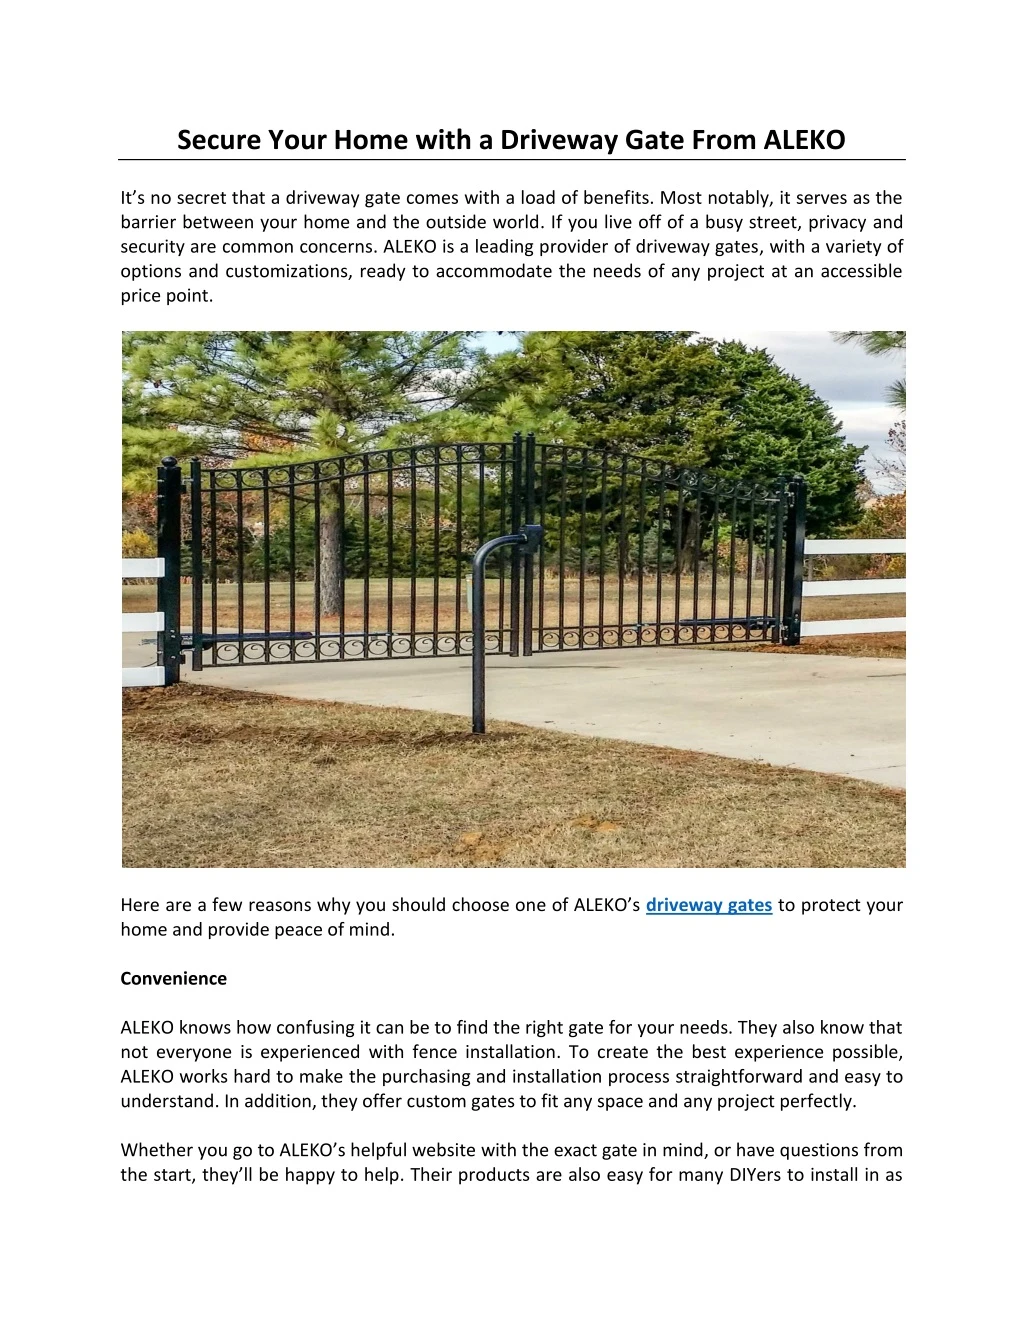 secure your home with a driveway gate from aleko